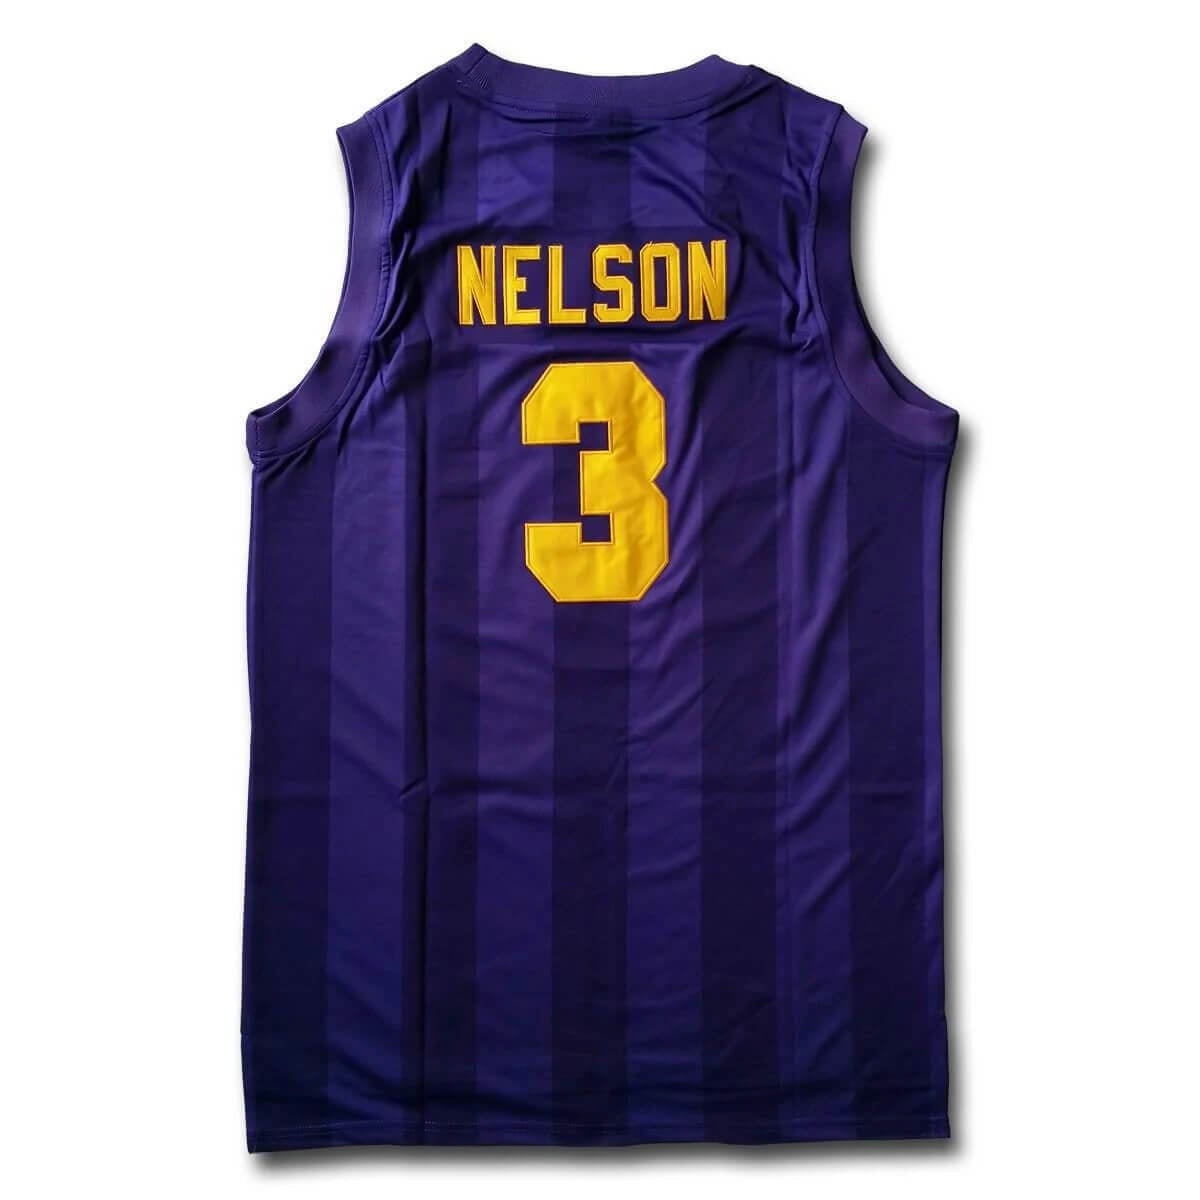 price nelson bryant jersey